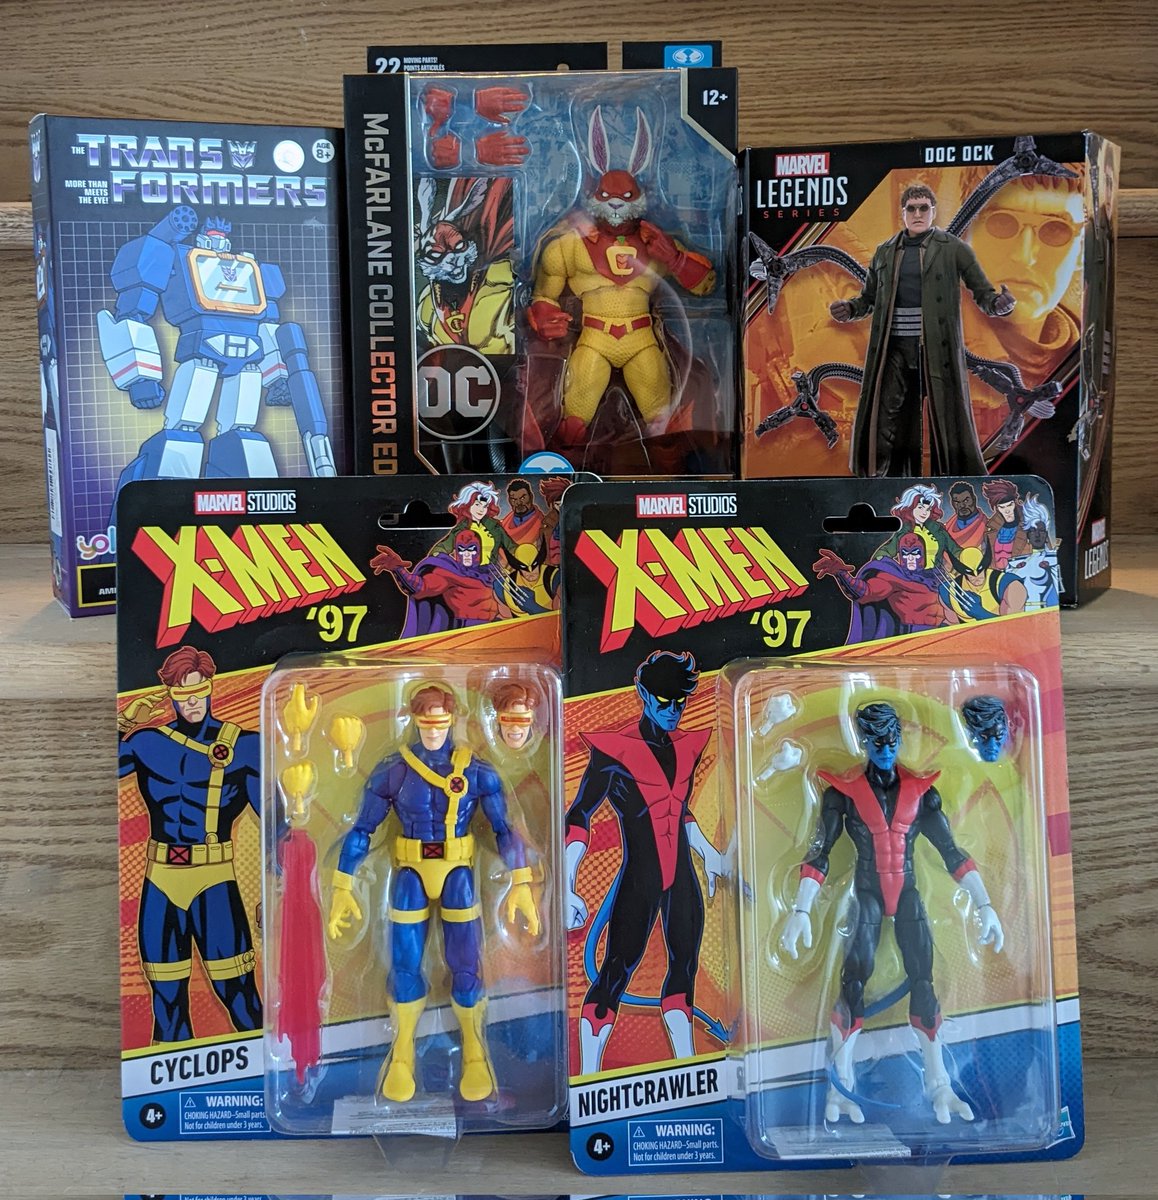 Shout out to @SeanWhitmore 
McF Multiverse Captain Carrot, standard version, is now in hand!

Few other deliveries too
From Amazon the Yolopark little Soundwave and two of the new X-Men '97 figures; Nightcrawler and Cyclops.
Doc Ock took the slow boat from Target